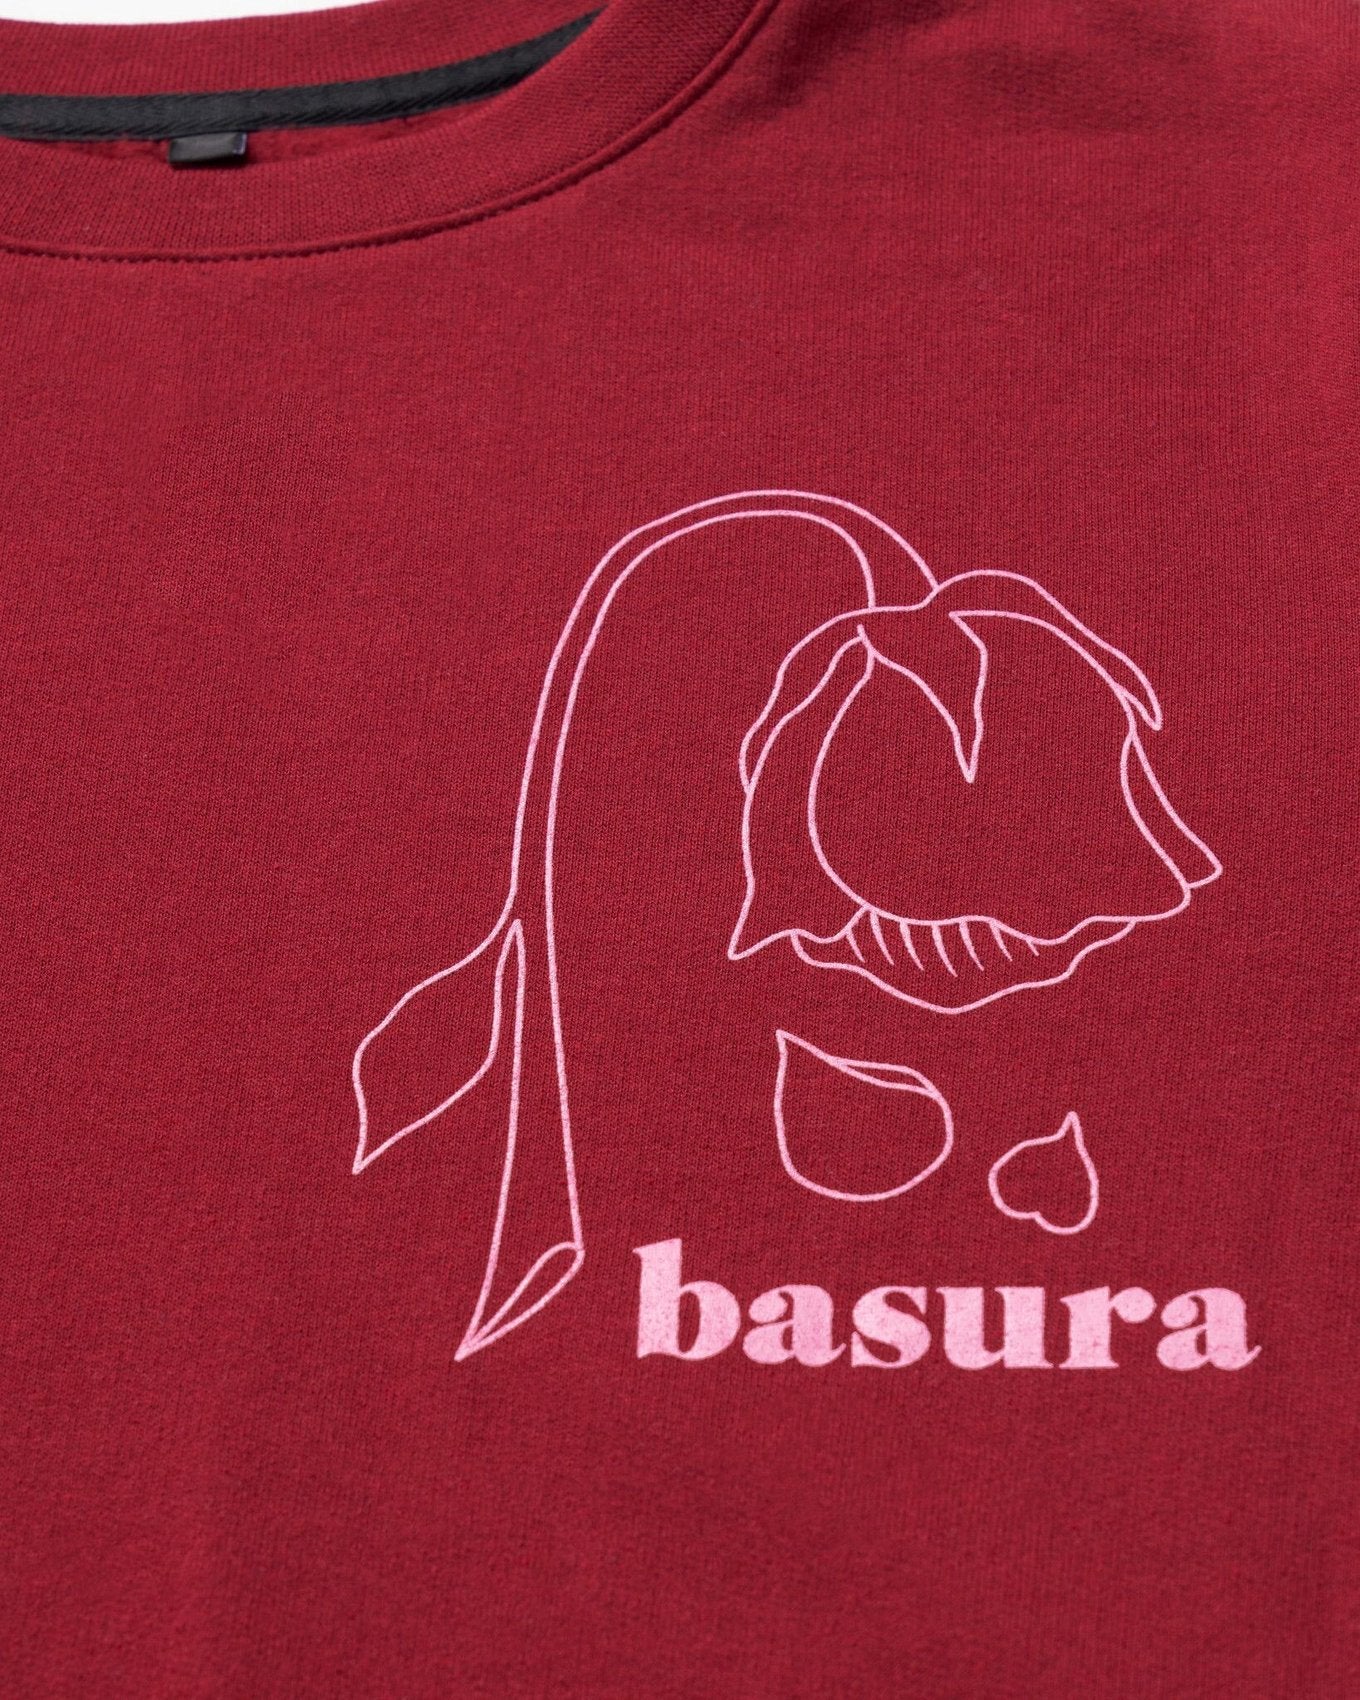 ReApparel Basura Crew Neck . in color Garnet and shape long sleeve